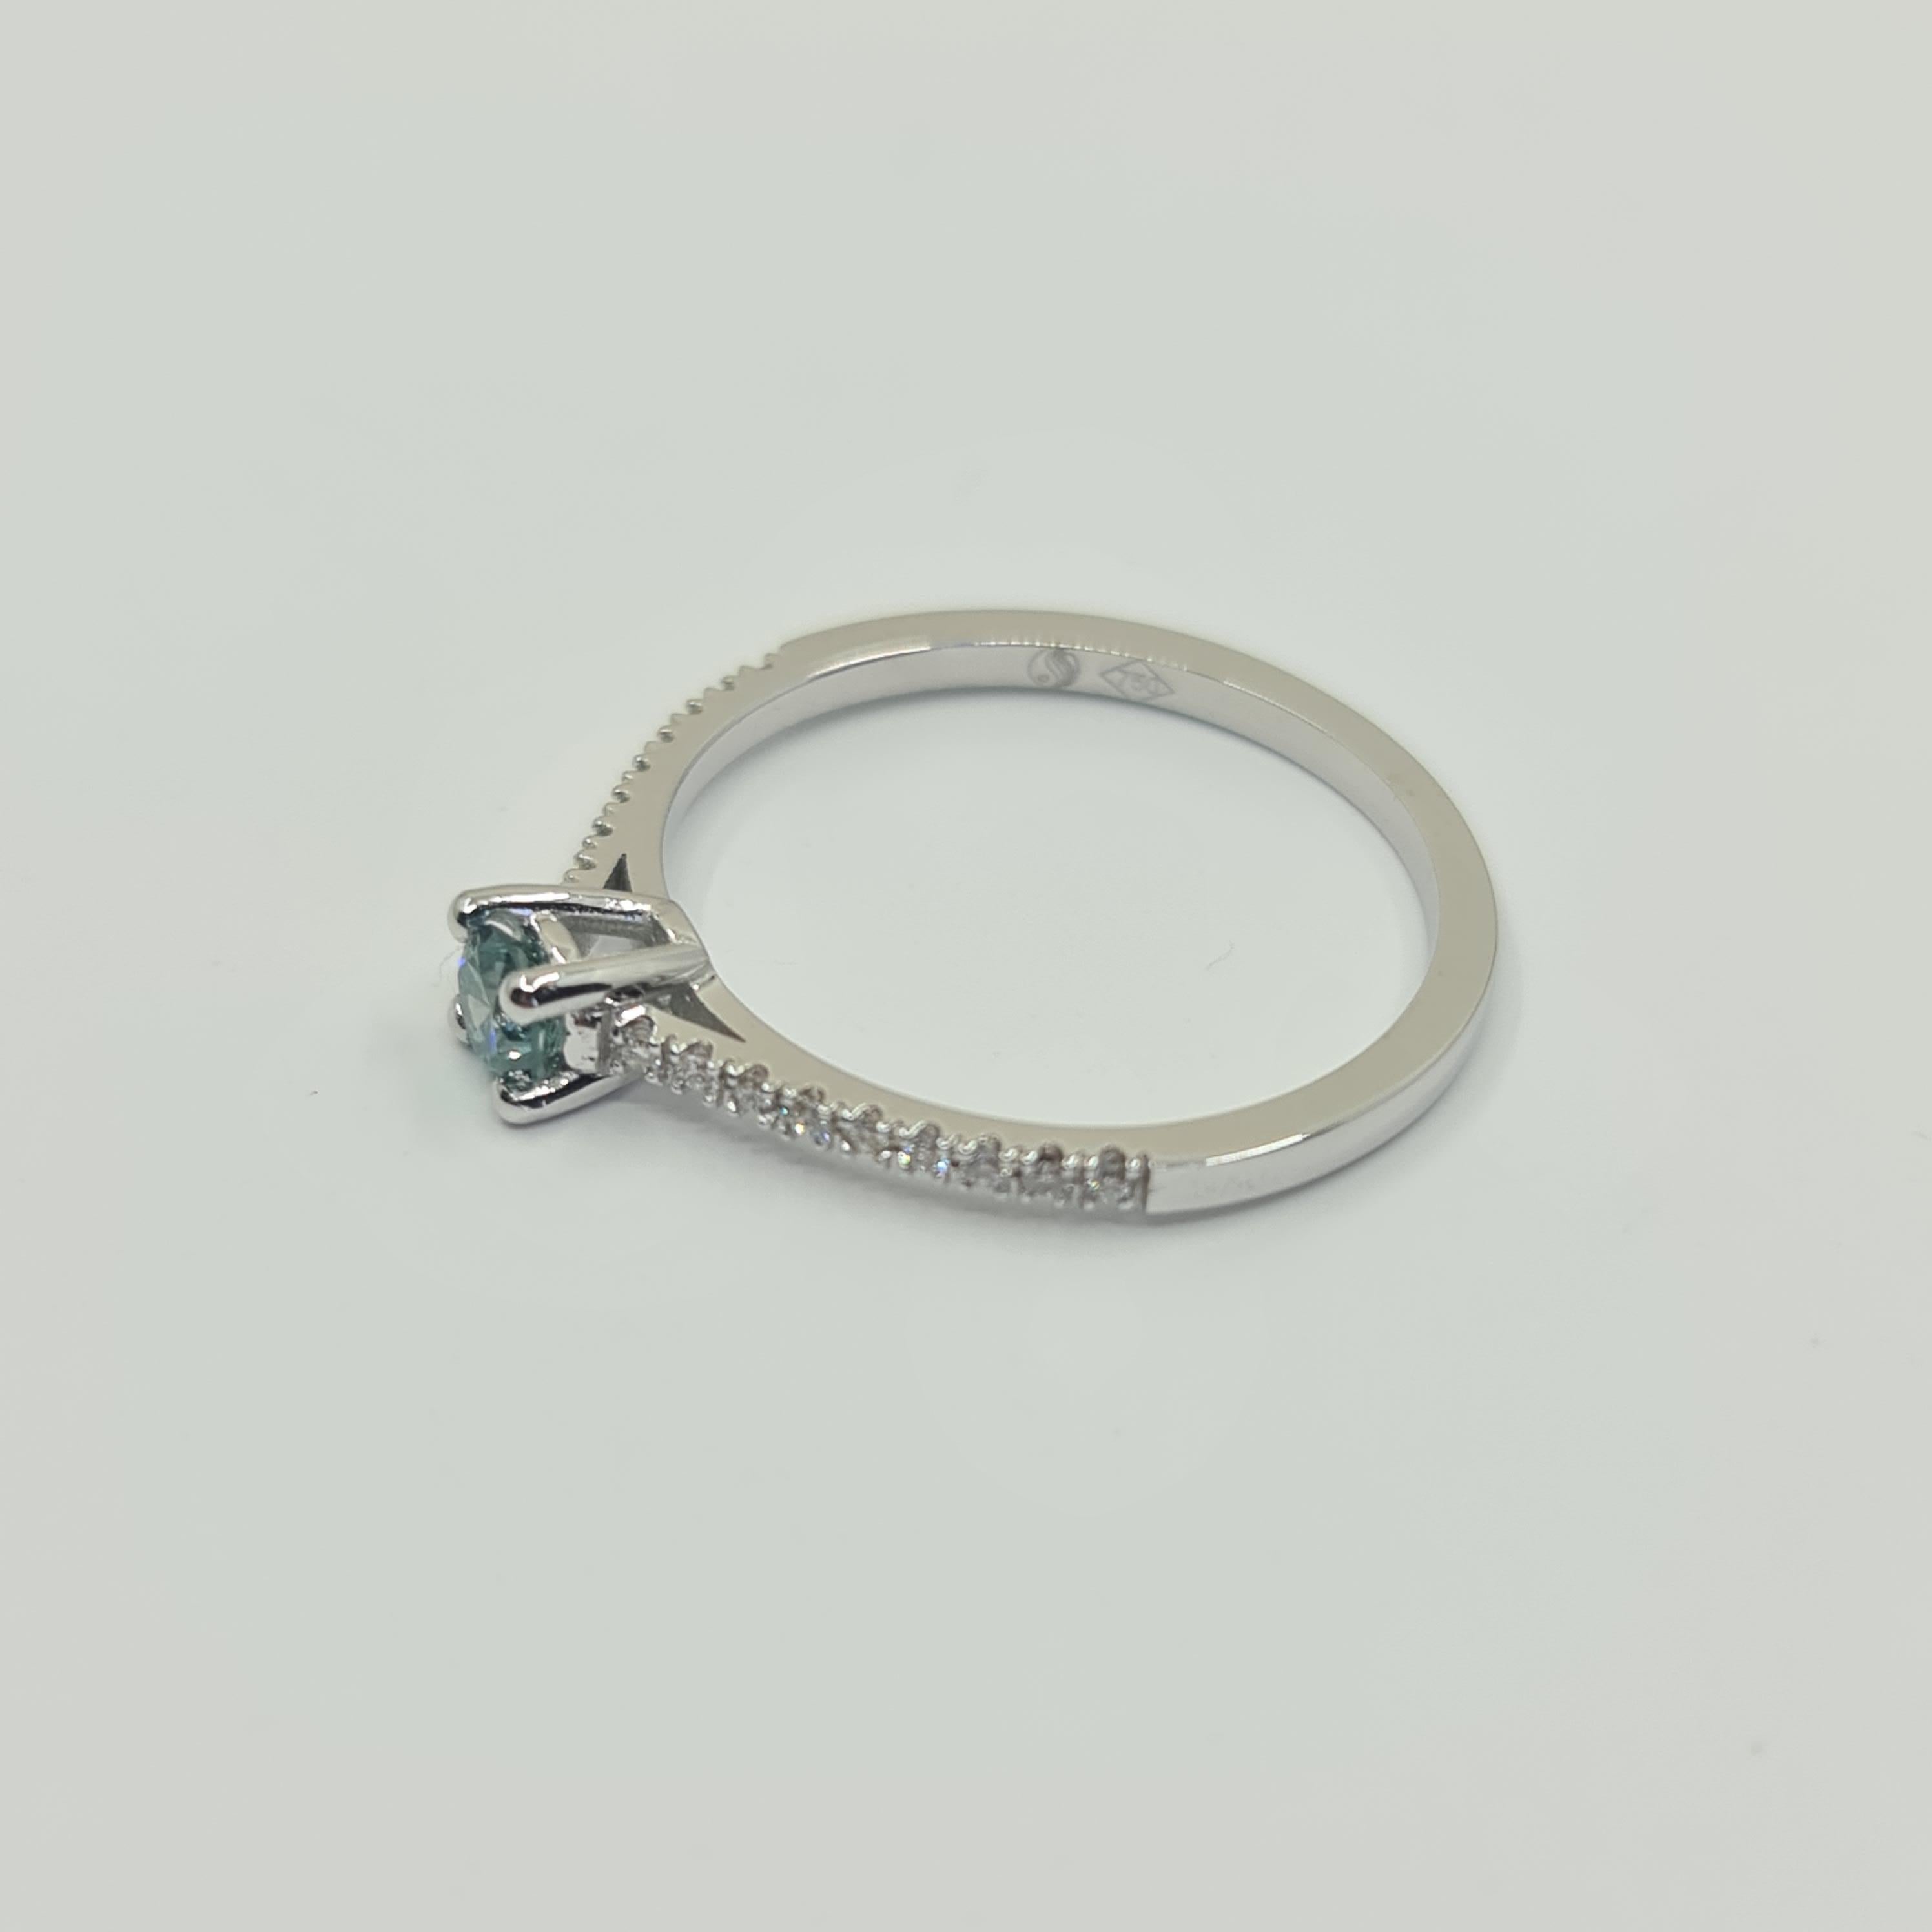 Exquisite GIA Certified Solitaire Diamond Ring 0.18 Carat Fancy Deep Blue-Green  For Sale 7